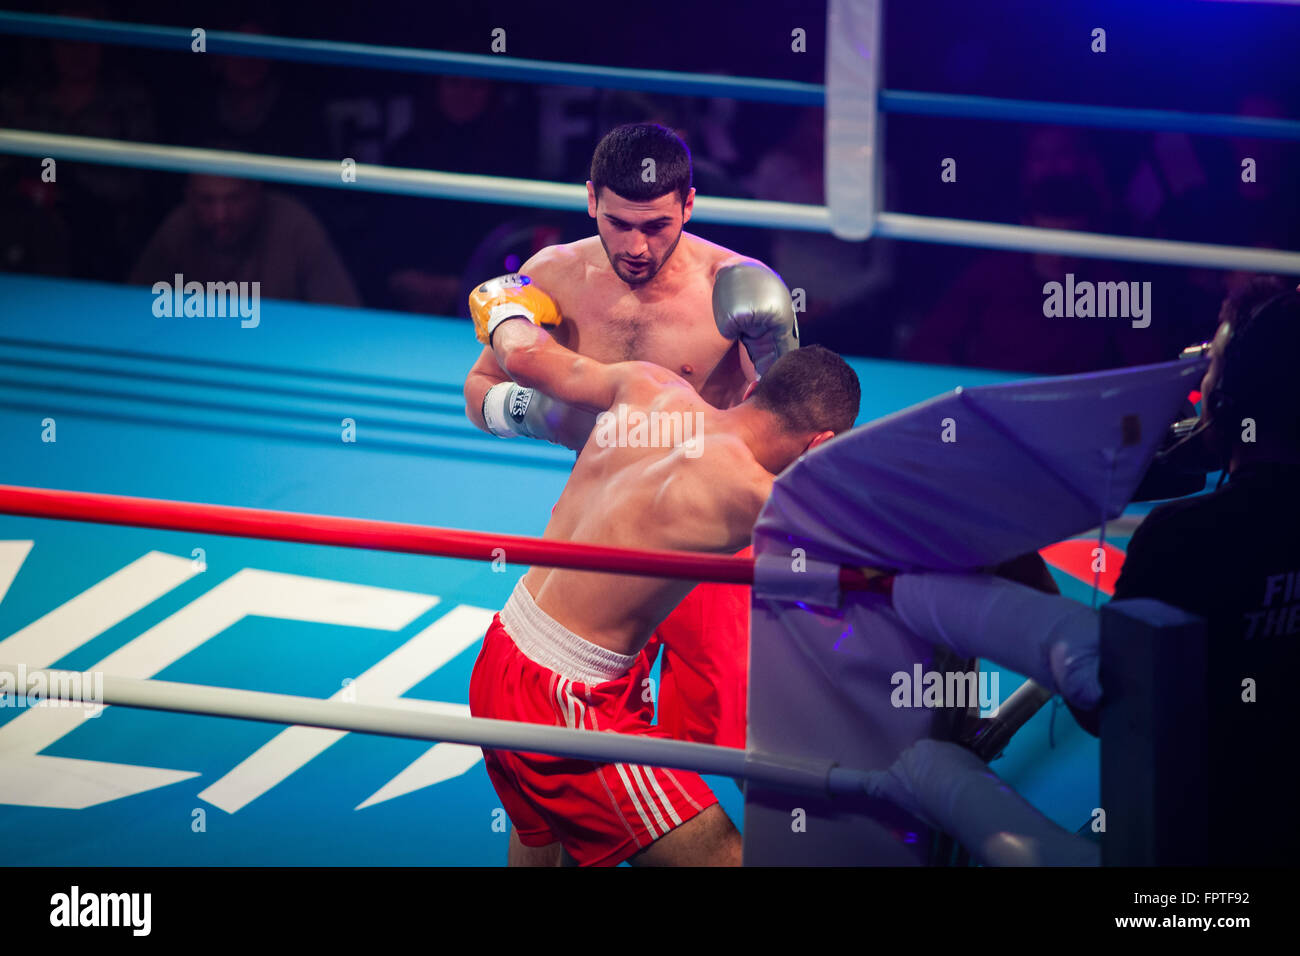 MOSCOW - 18 MARCH, 2016 : Professional boxing show Fight For The Future. Jheritz Chaves versus Vage Sarukhanyan (won) fought for the WBC EPBC (Eurasia Pacific Boxing Council) Championship promoted by Punch Boxing Promotions. Boxers Uriy Trogiyanov, Manvel Sargsyan, Jora Amazaryan, Ayk Shakhnazaryan also fought on the ring. Stock Photo